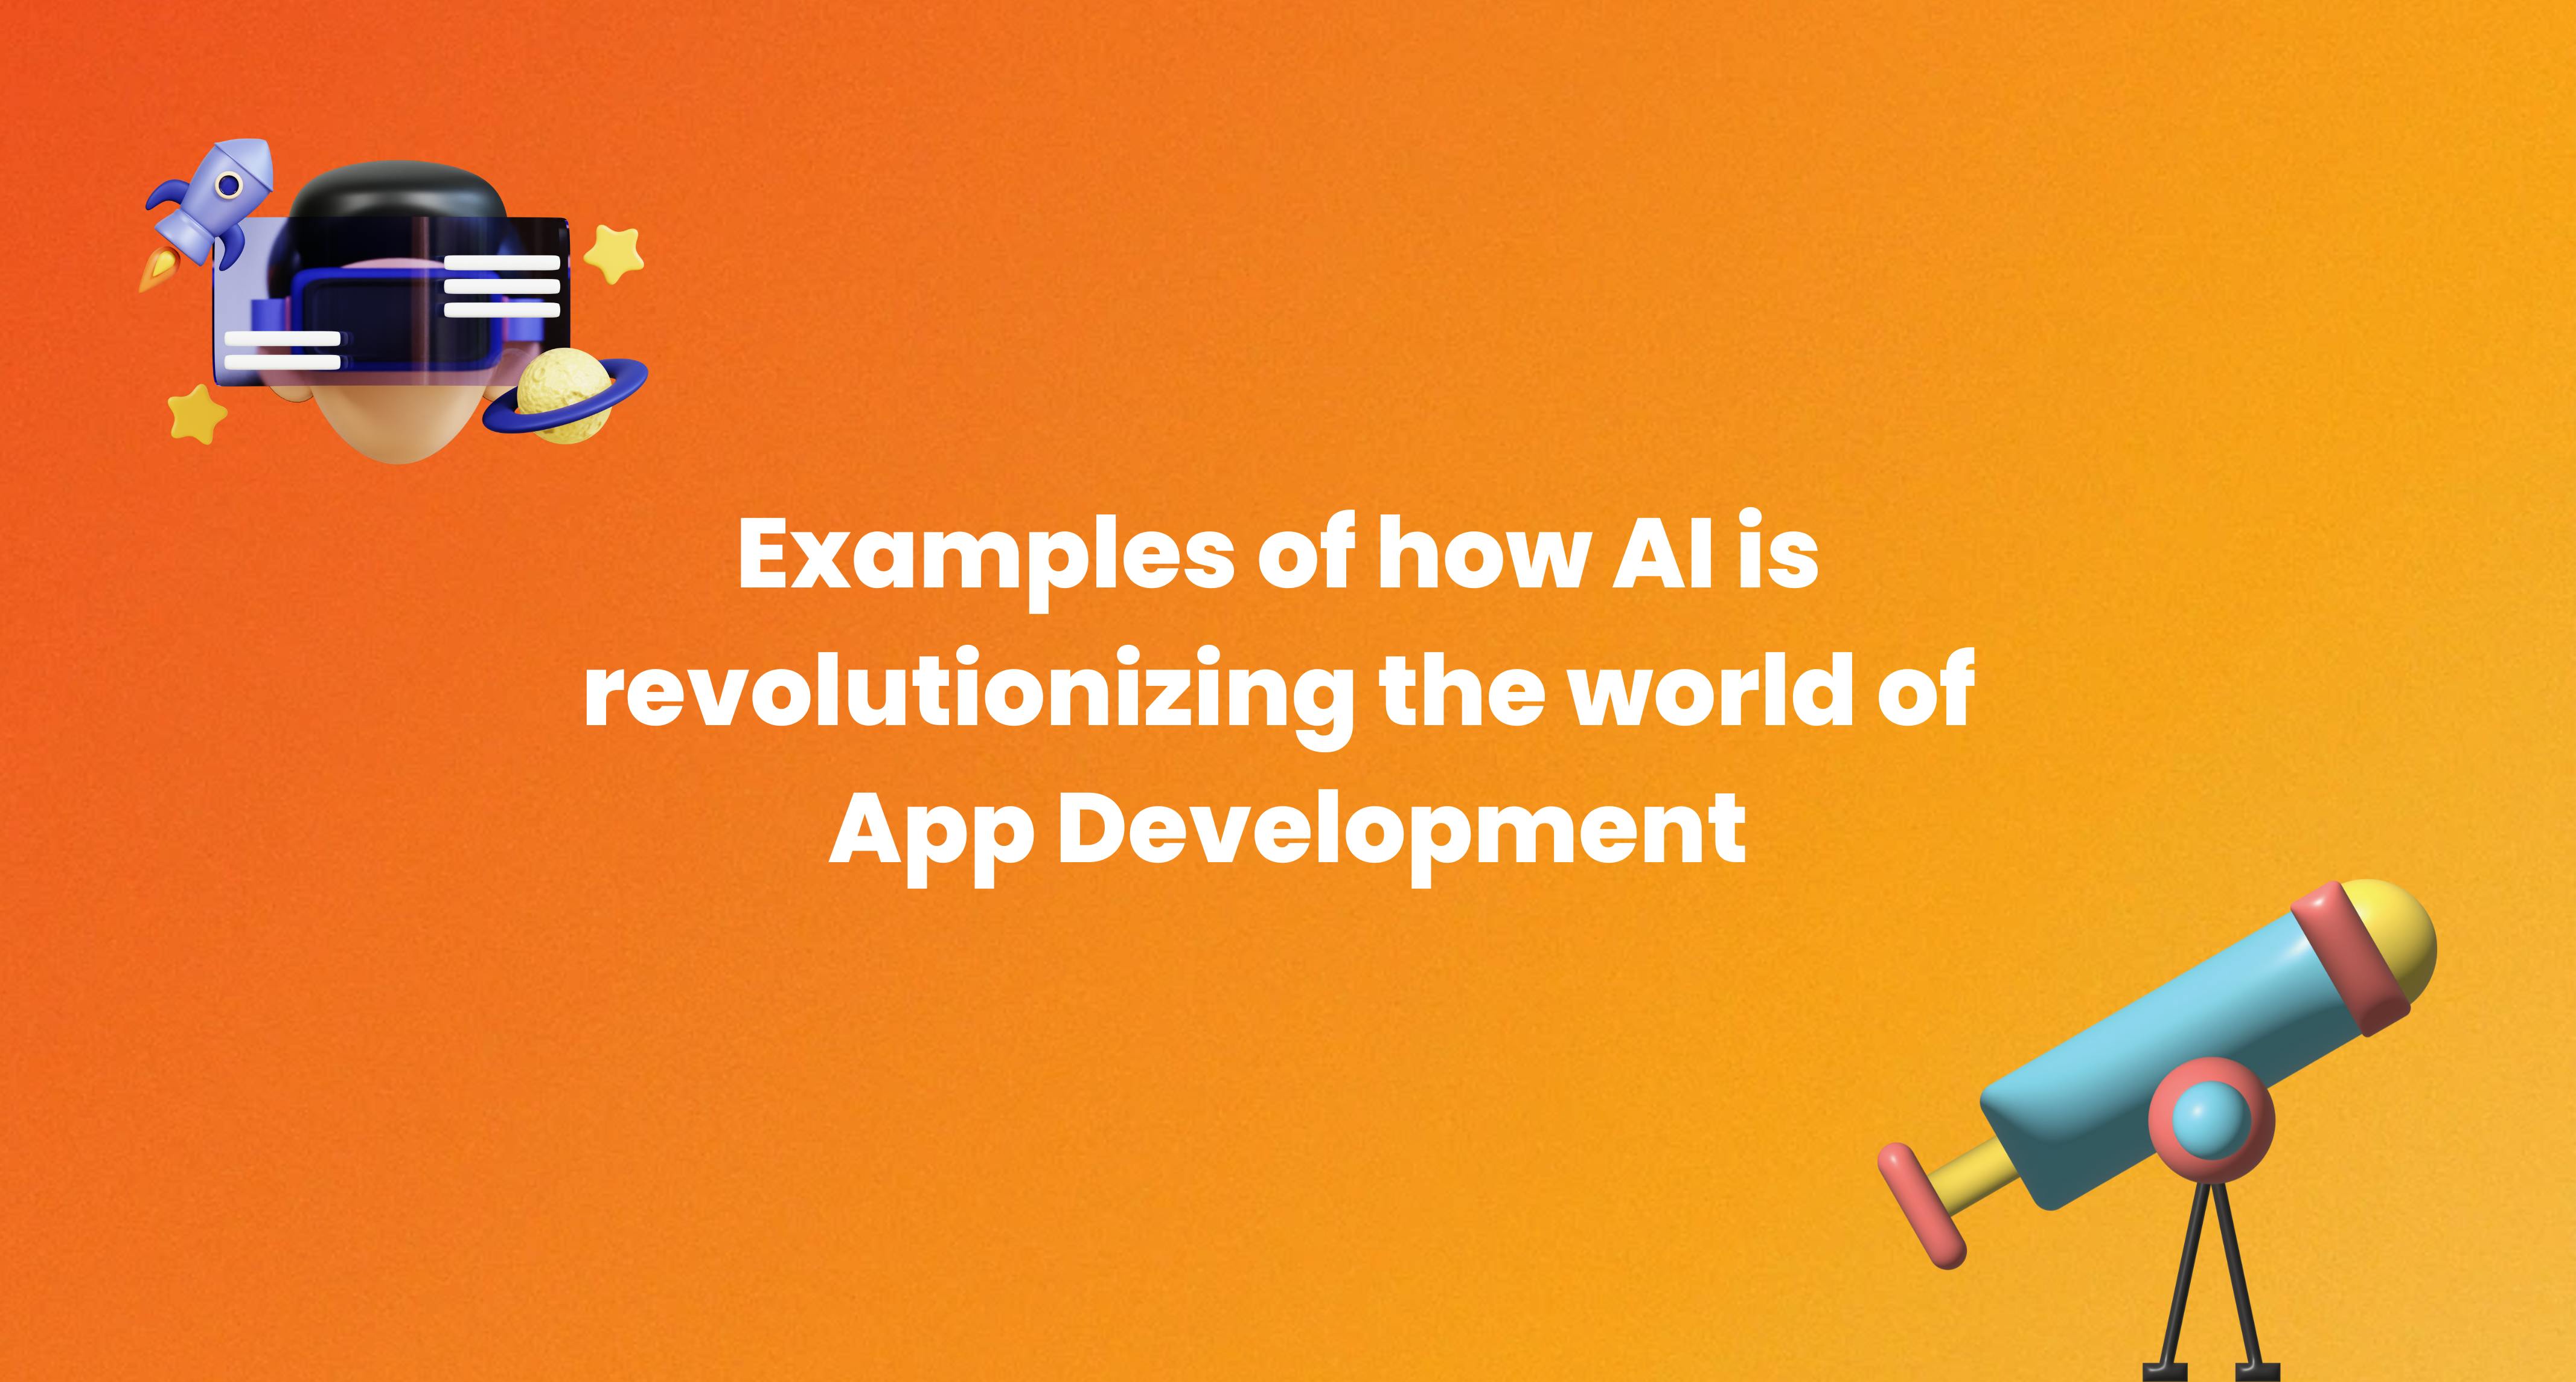 Nightborn - Examples of how AI is revolutionizing the world of App Development